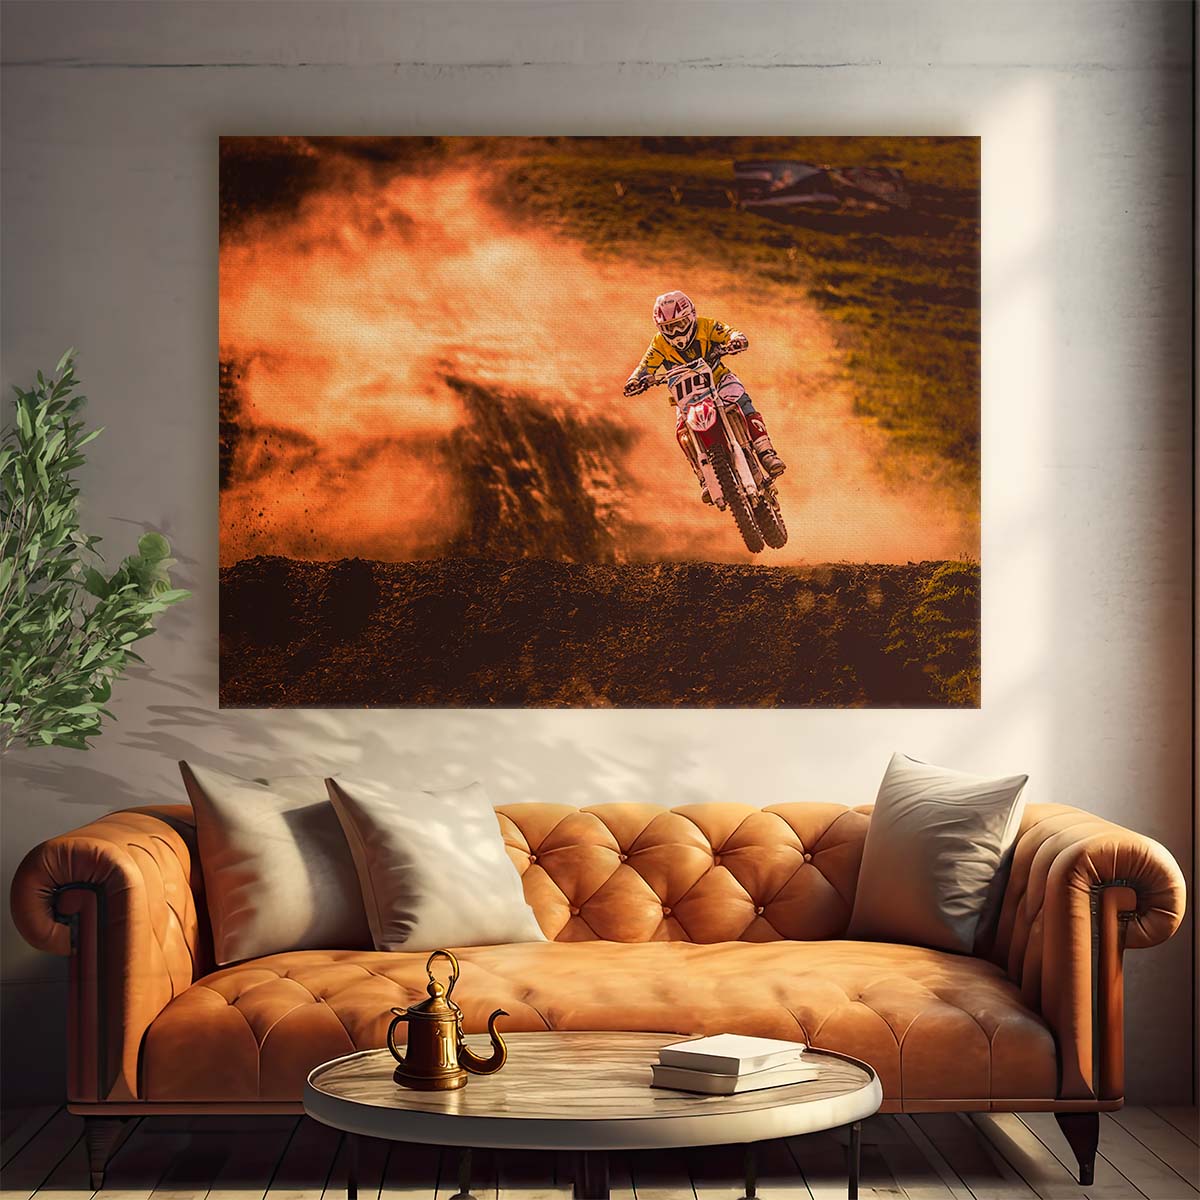 Motocross Mastery Extreme Race & Flight Wall Art by Luxuriance Designs. Made in USA.